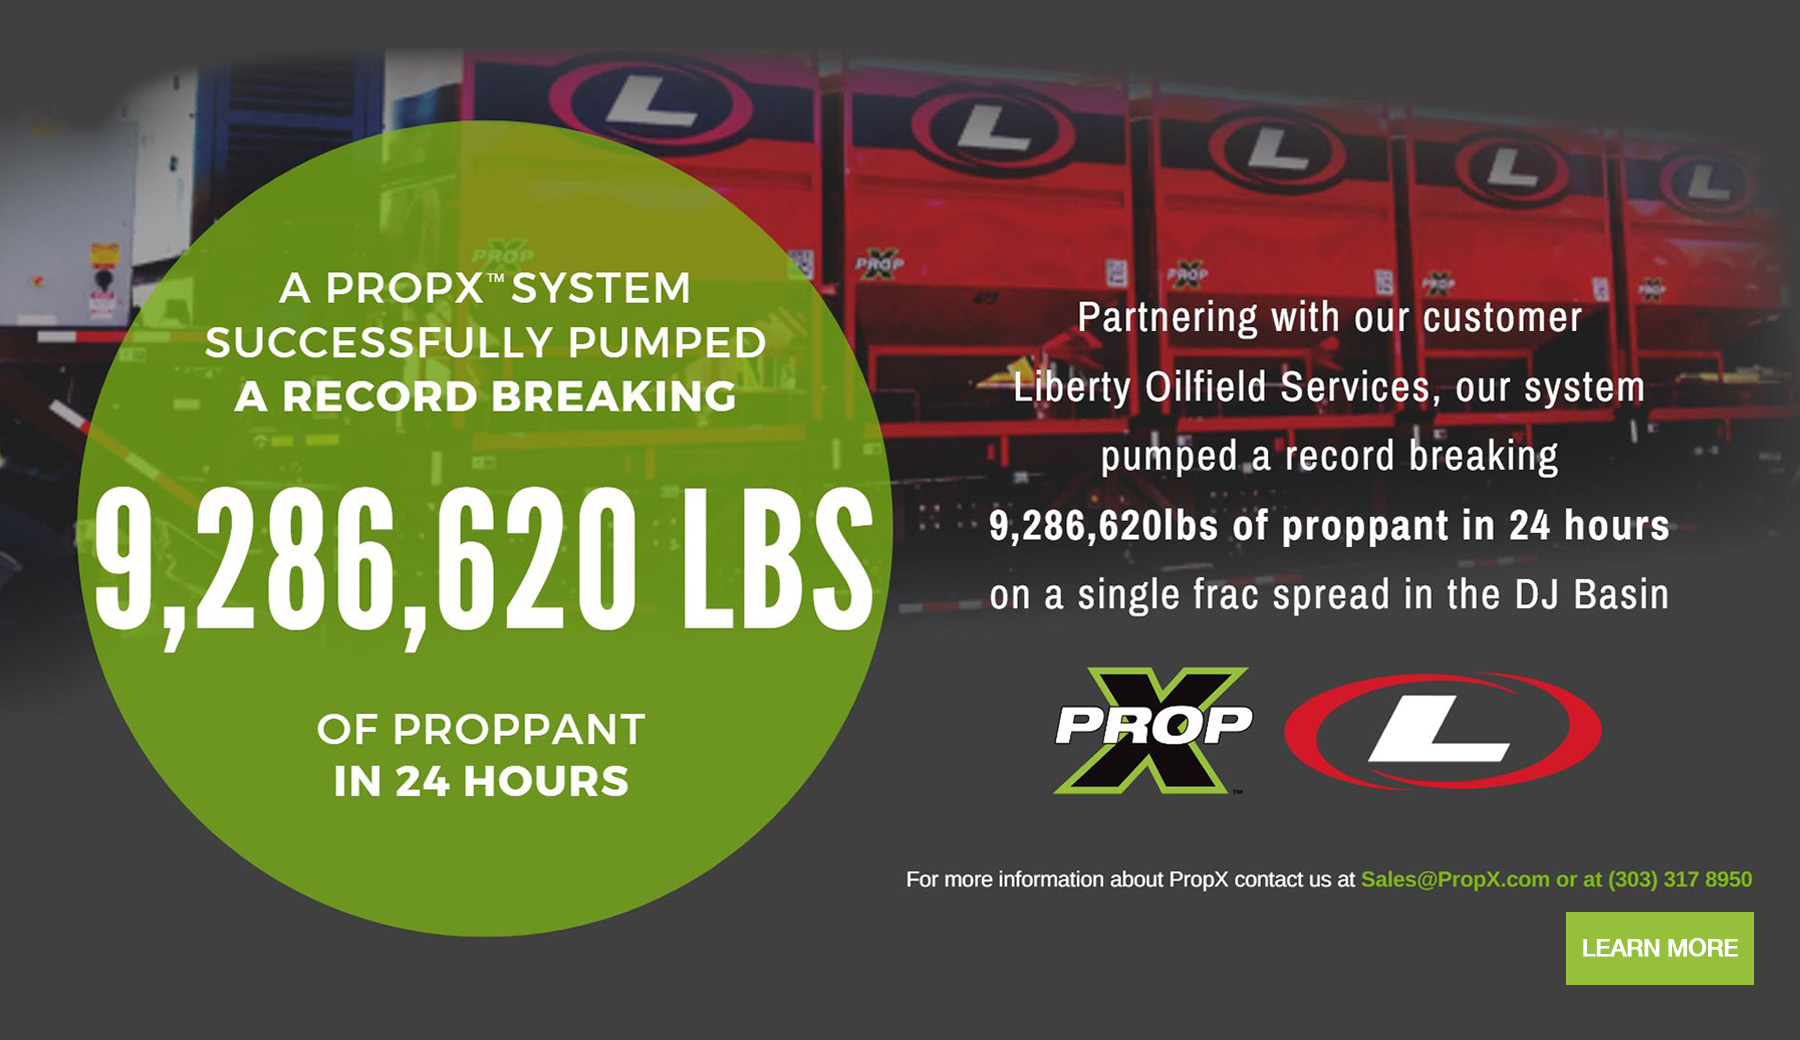 A PropX System Successfully Pumped a Record Breaking 9,286,620 lbs proppant in 24 hours